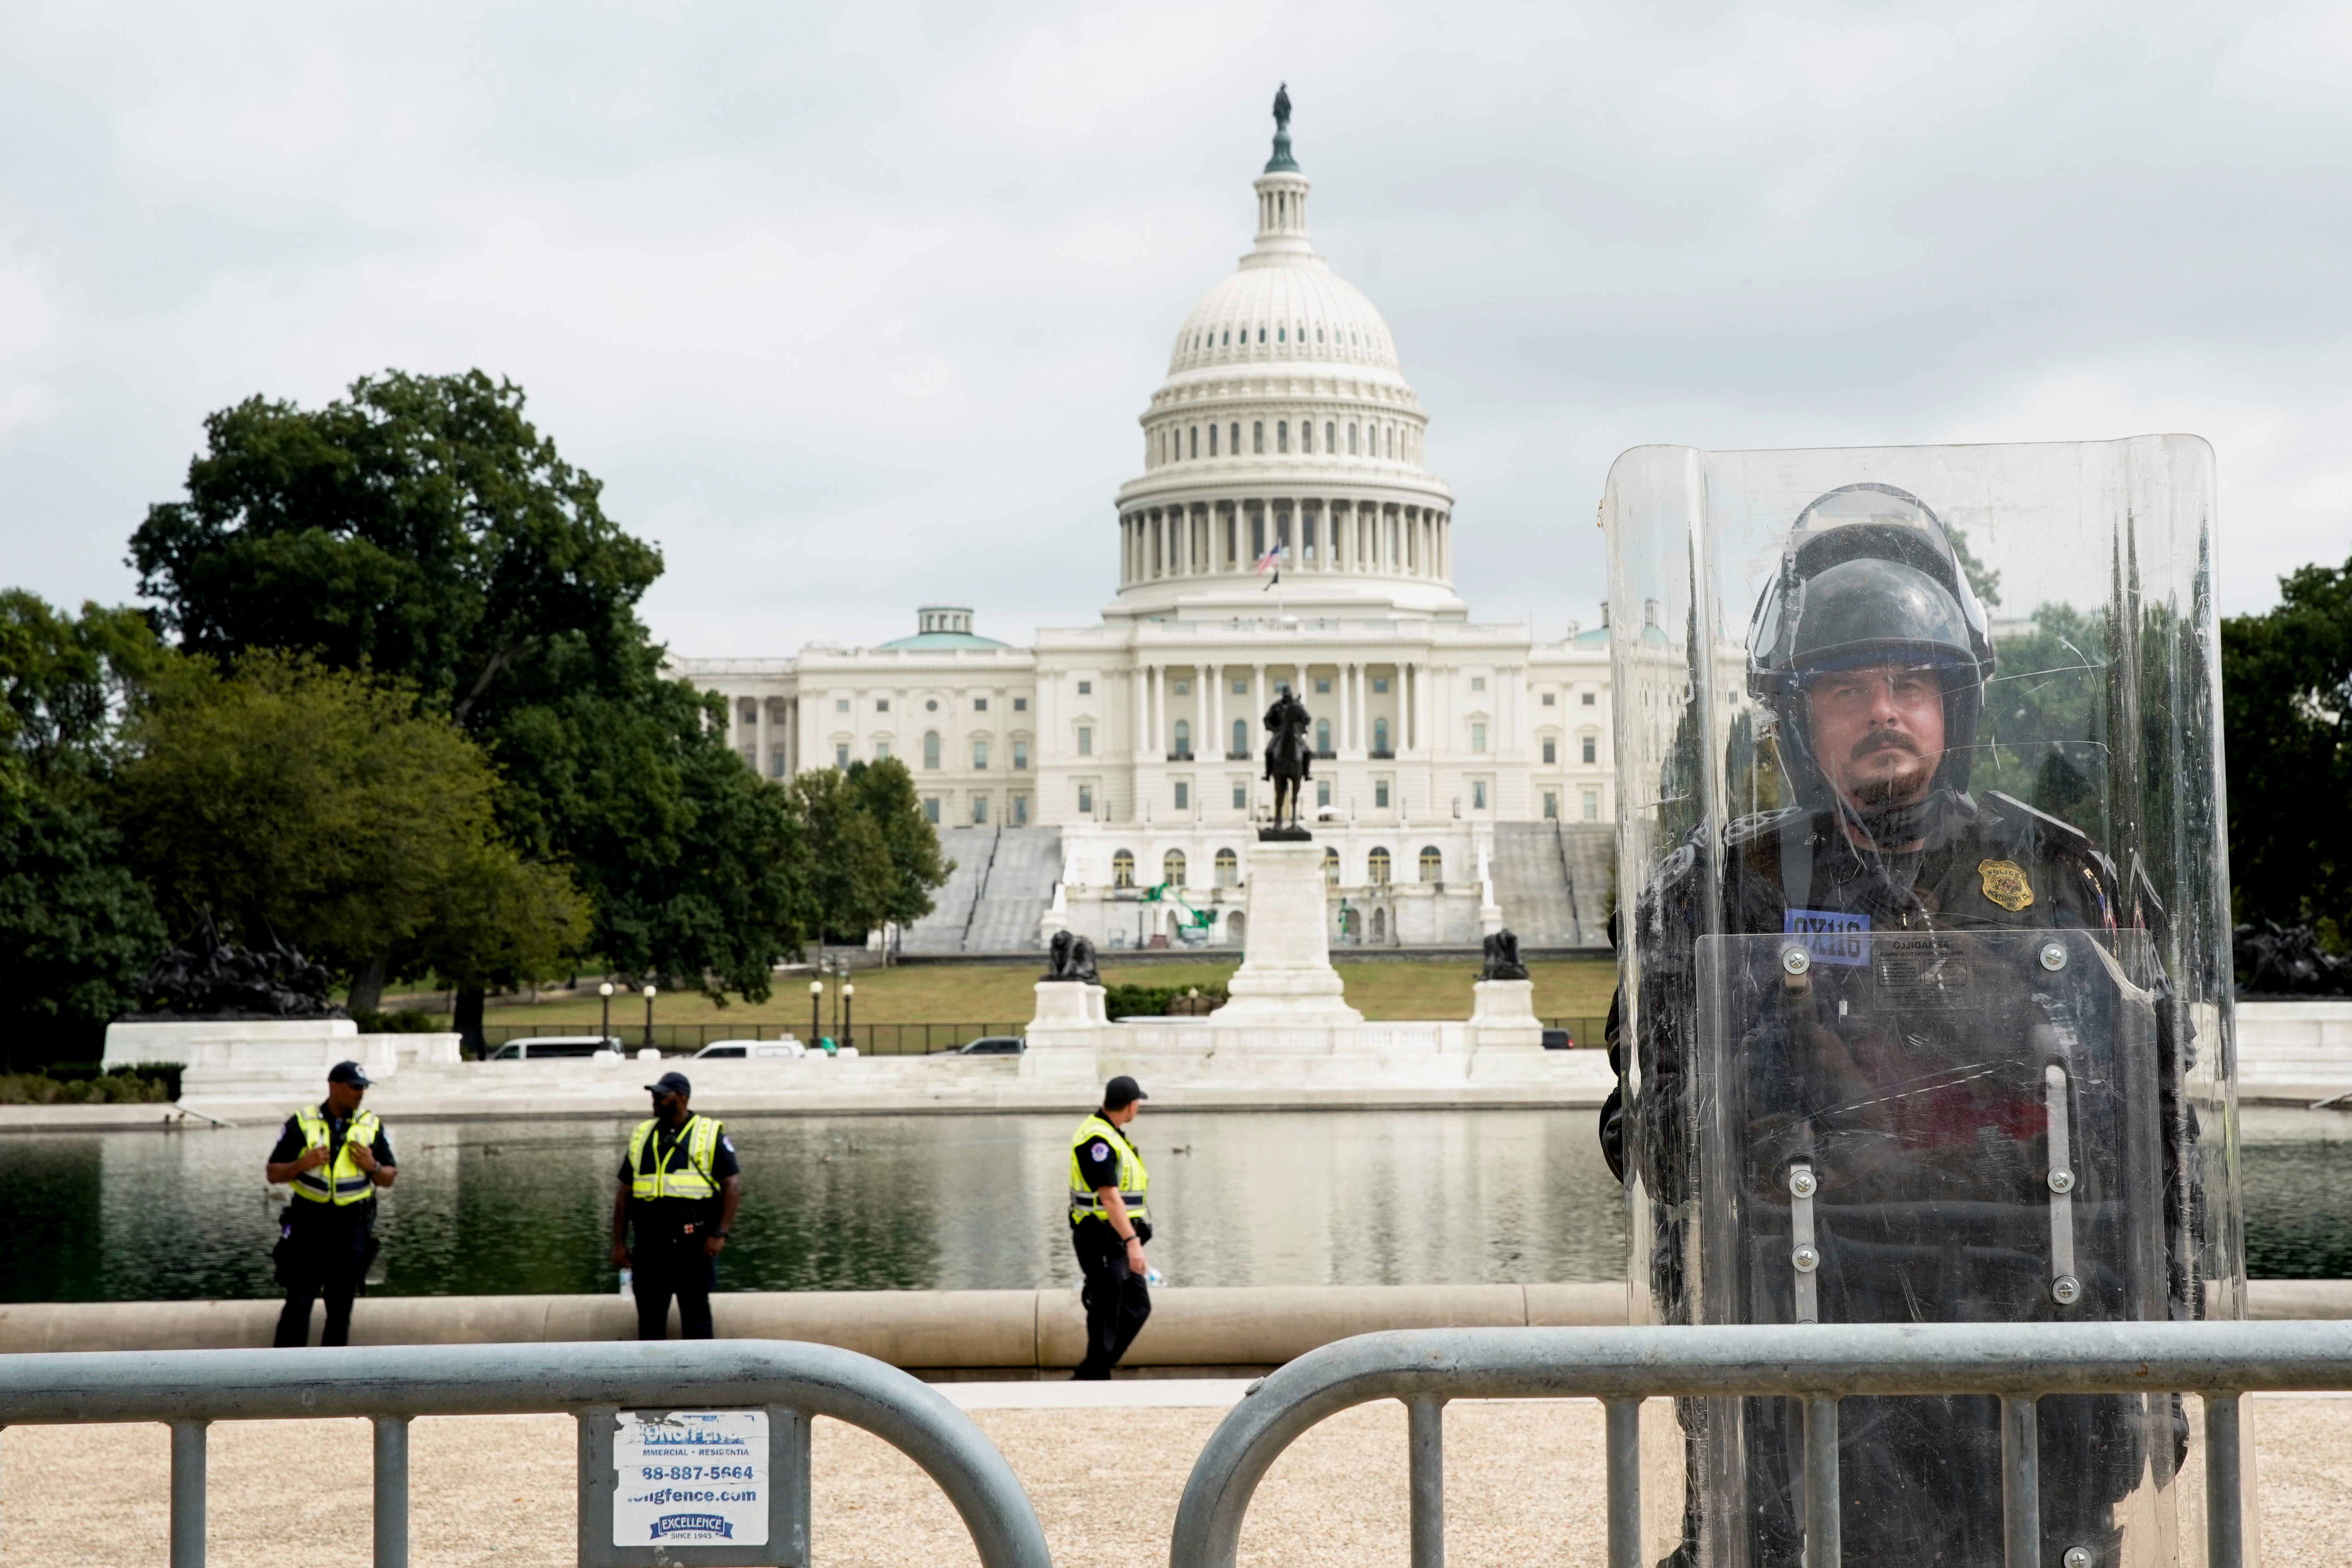 A riot police officer stands guard during a rally in support of defendants being prosecuted in the January 6 attack on the Capitol, in Washington, U.S., September 18, 2021. REUTERS/Elizabeth Frantz/File Photo